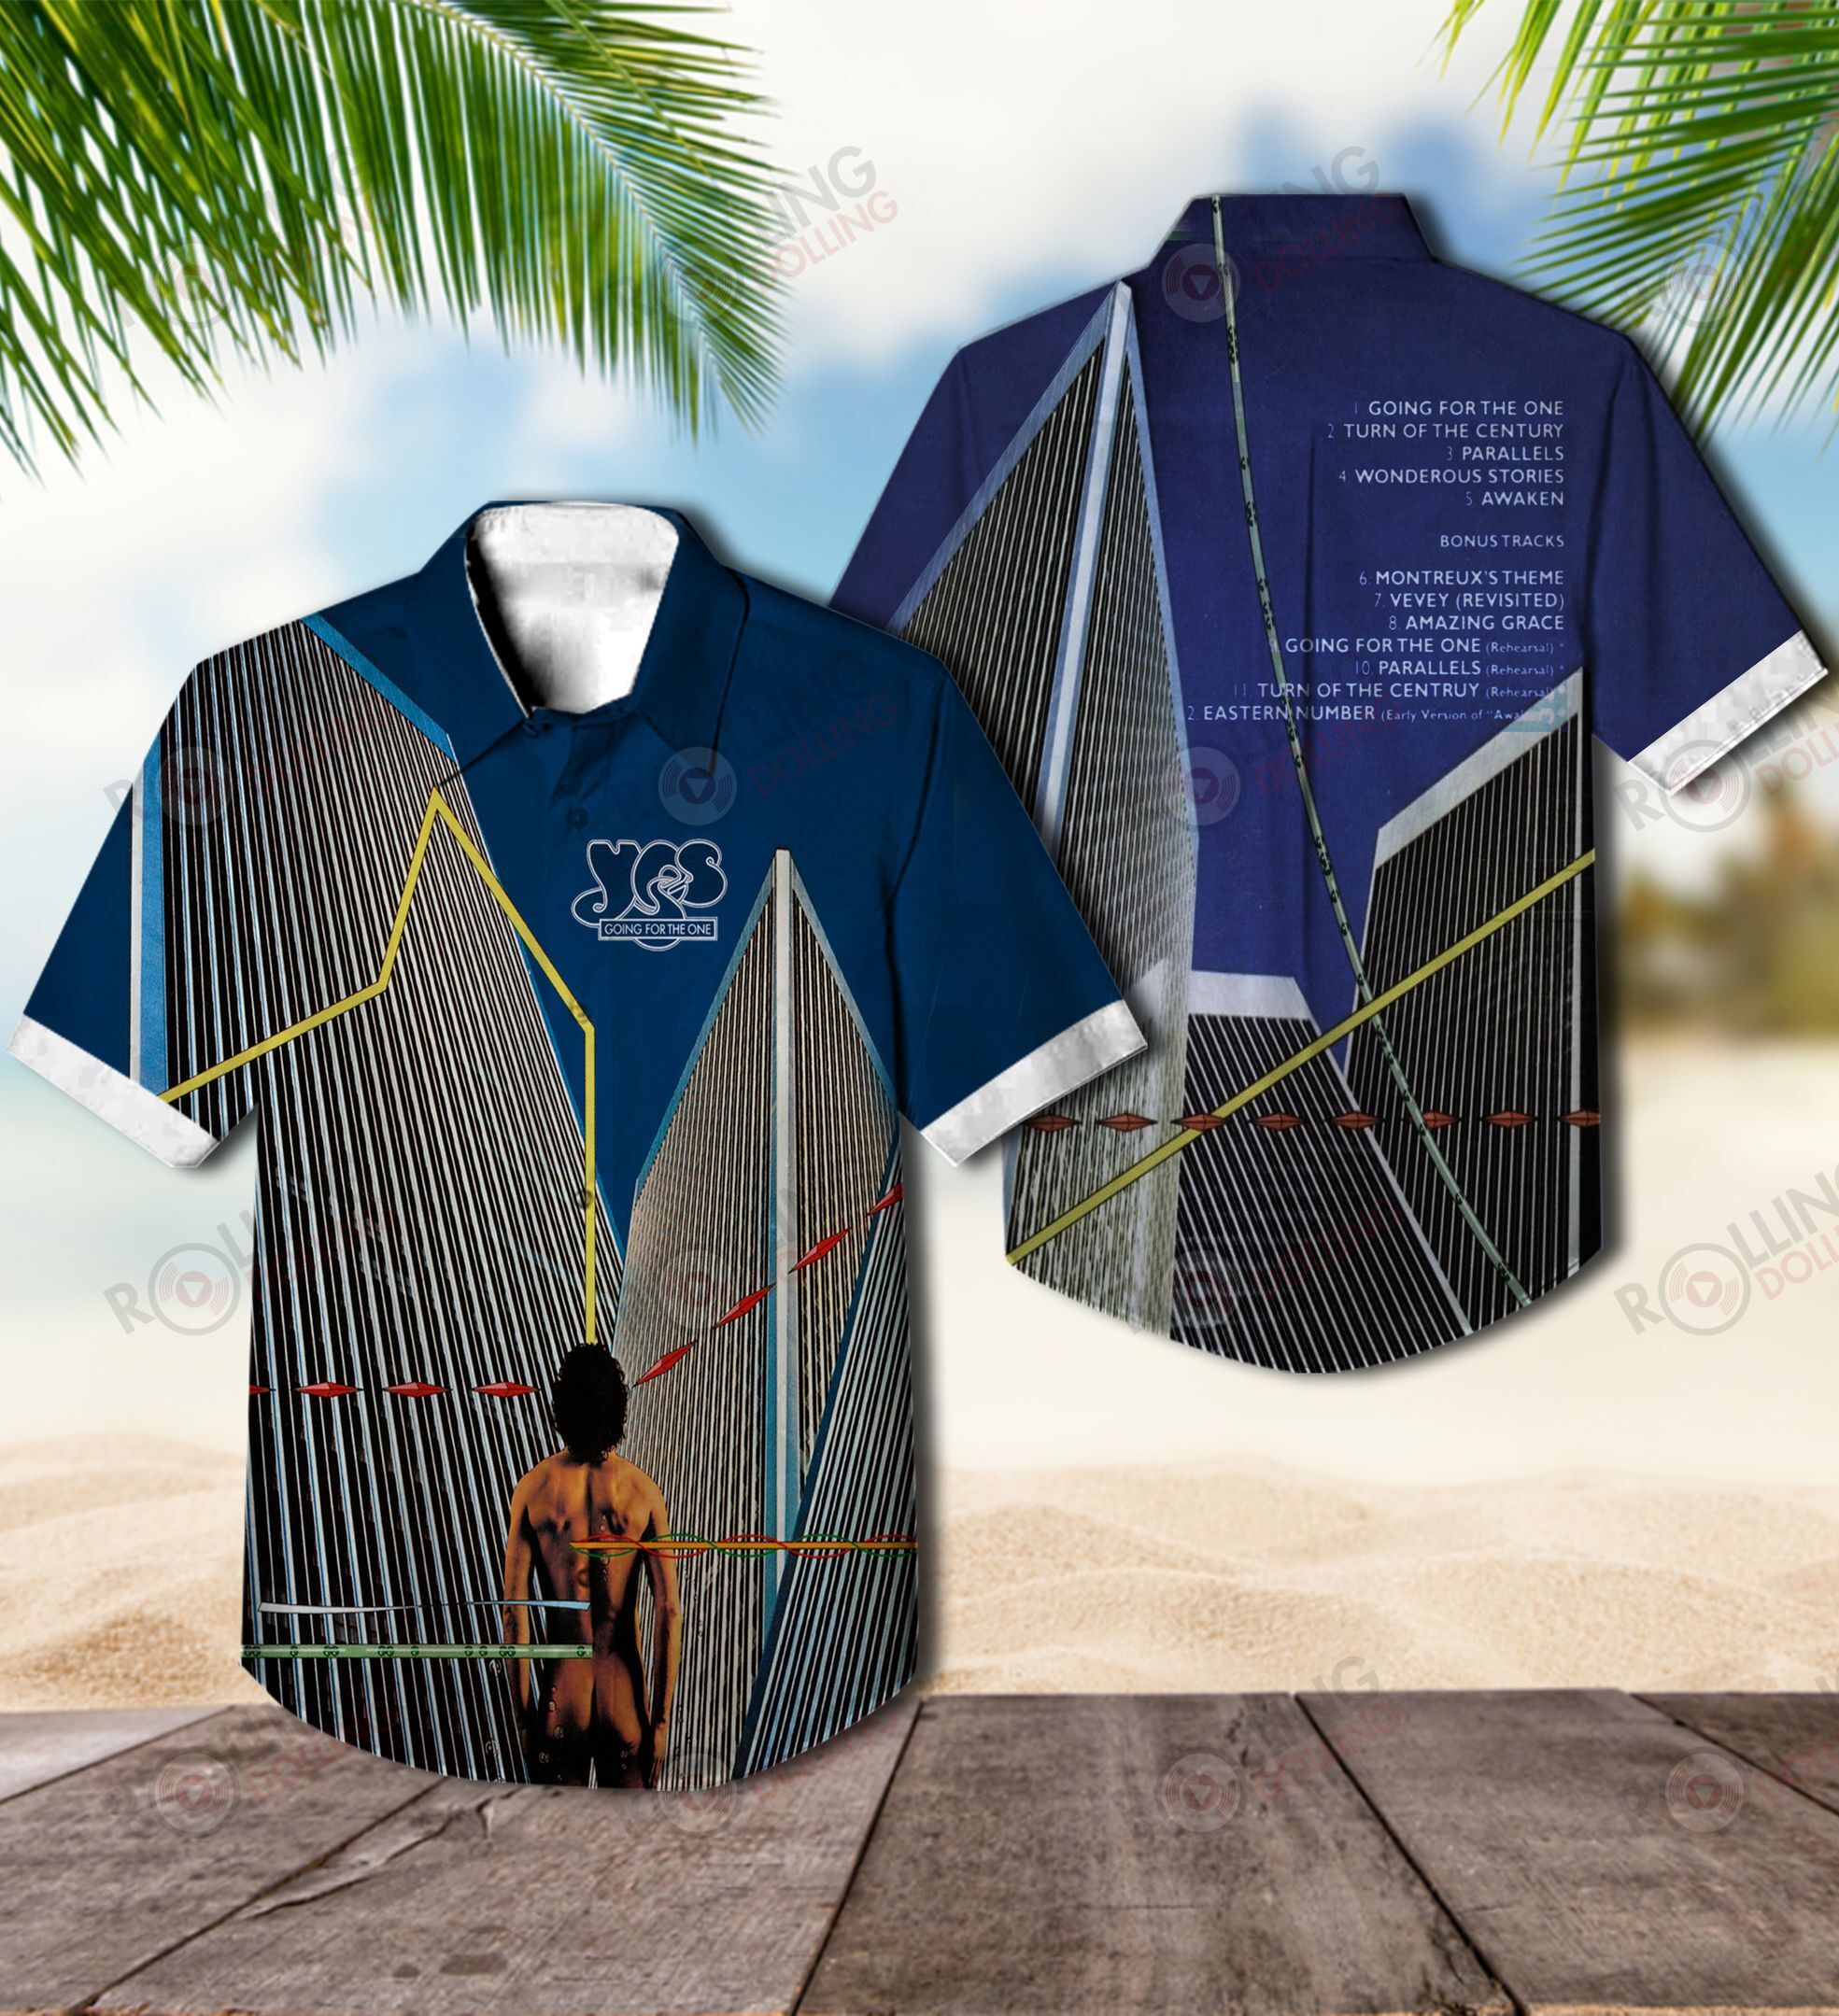 This would make a great gift for any fan who loves Hawaiian Shirt as well as Rock band 42